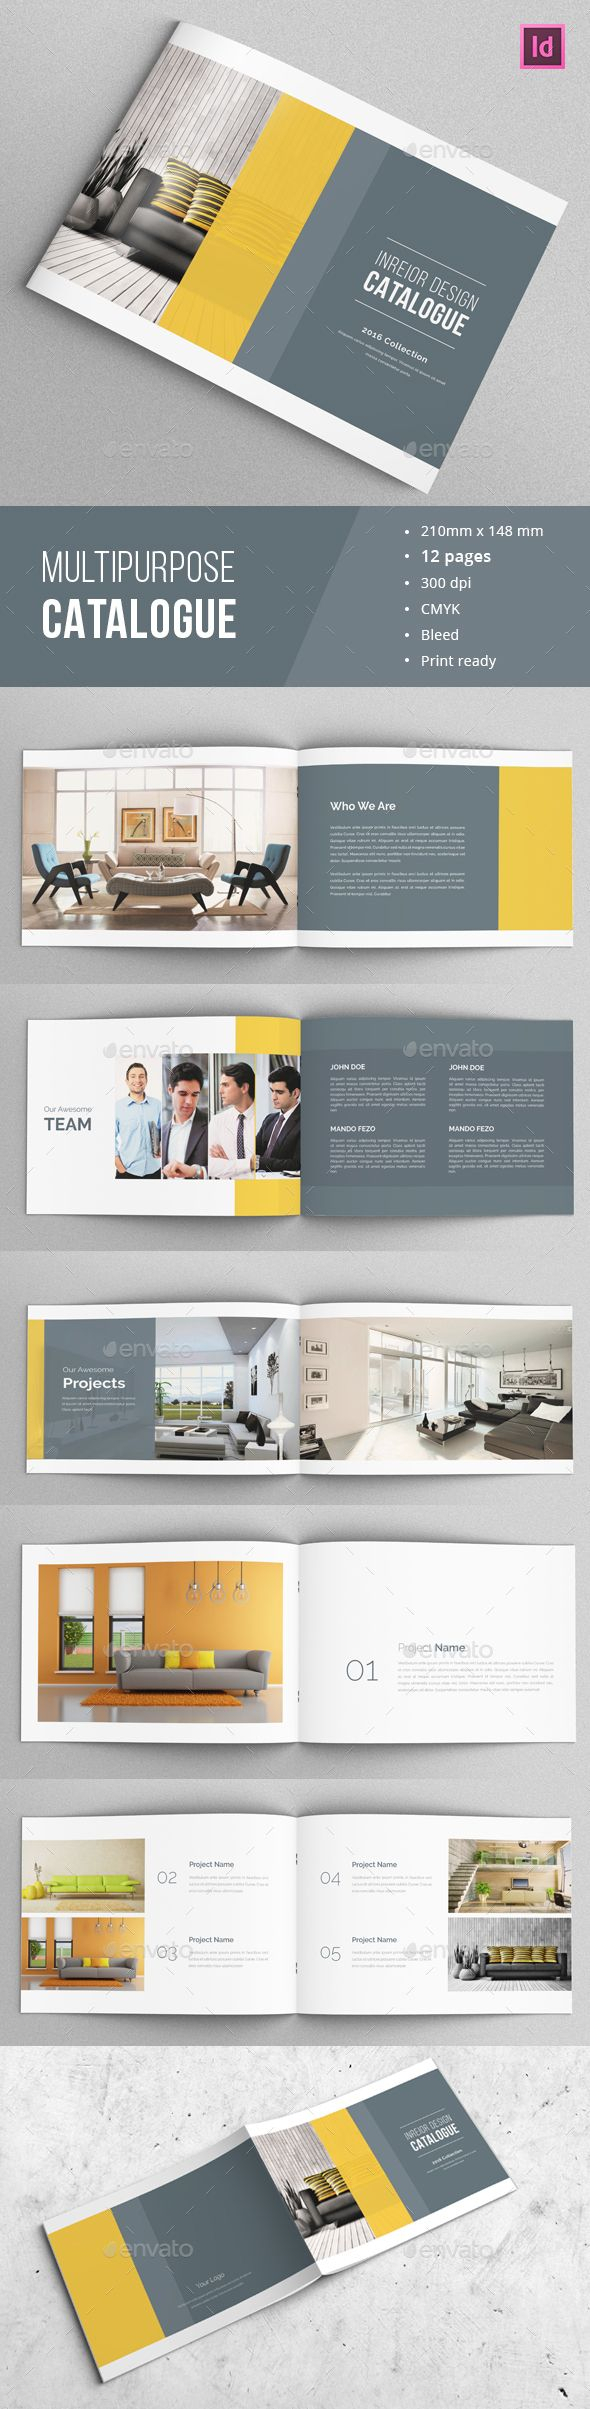 Multipurpose Brochure / Catalogue Template This Is 12 Page In 12 Page Brochure Template